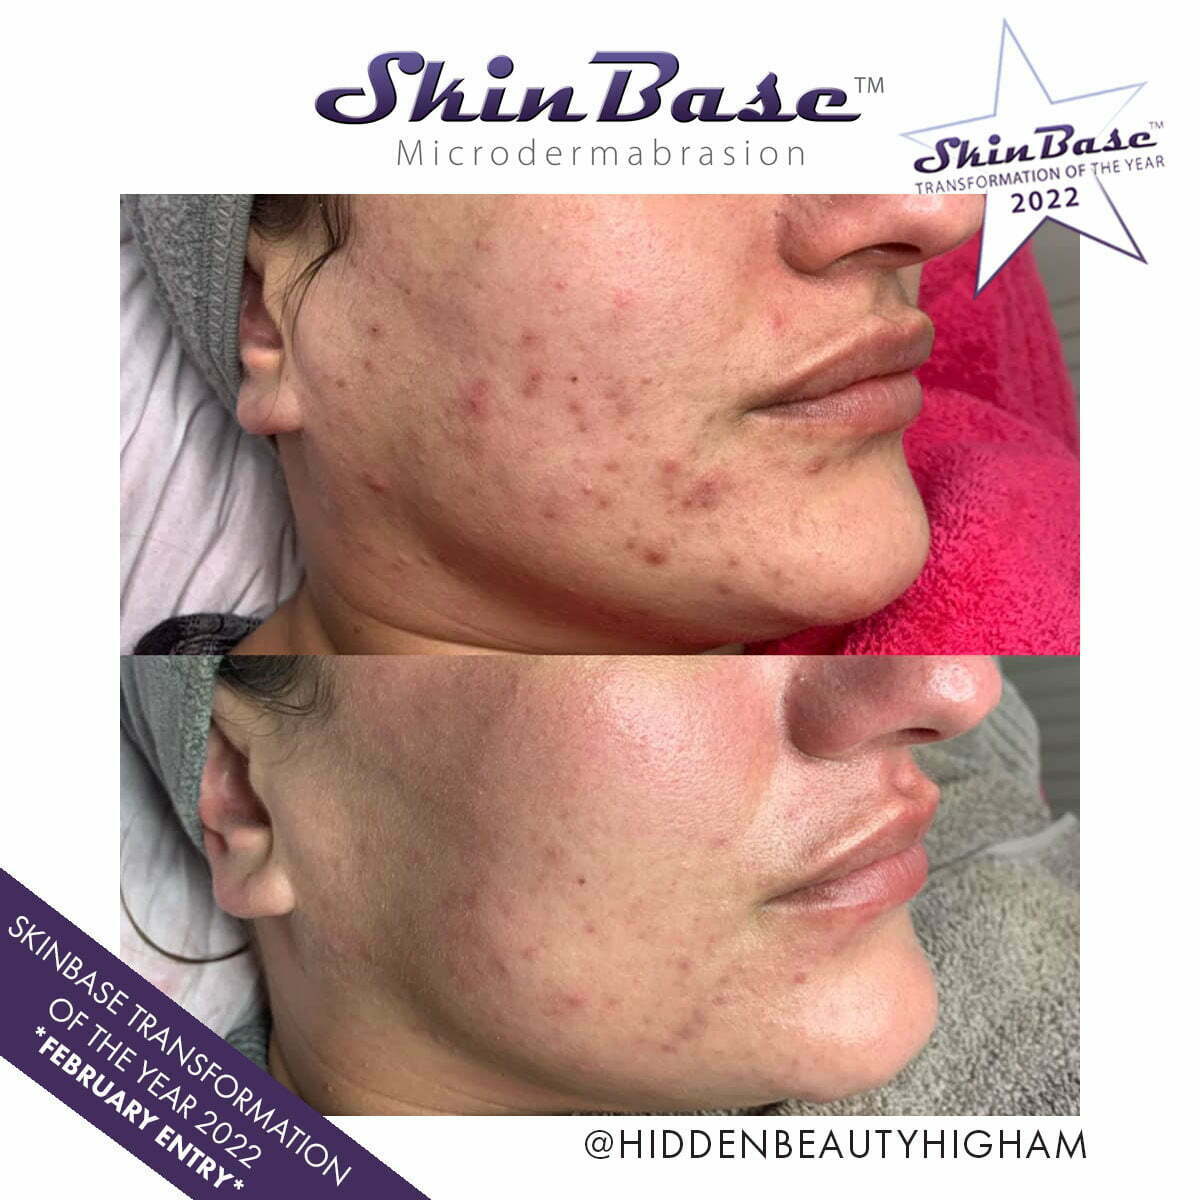 Before and after microdermabrasion